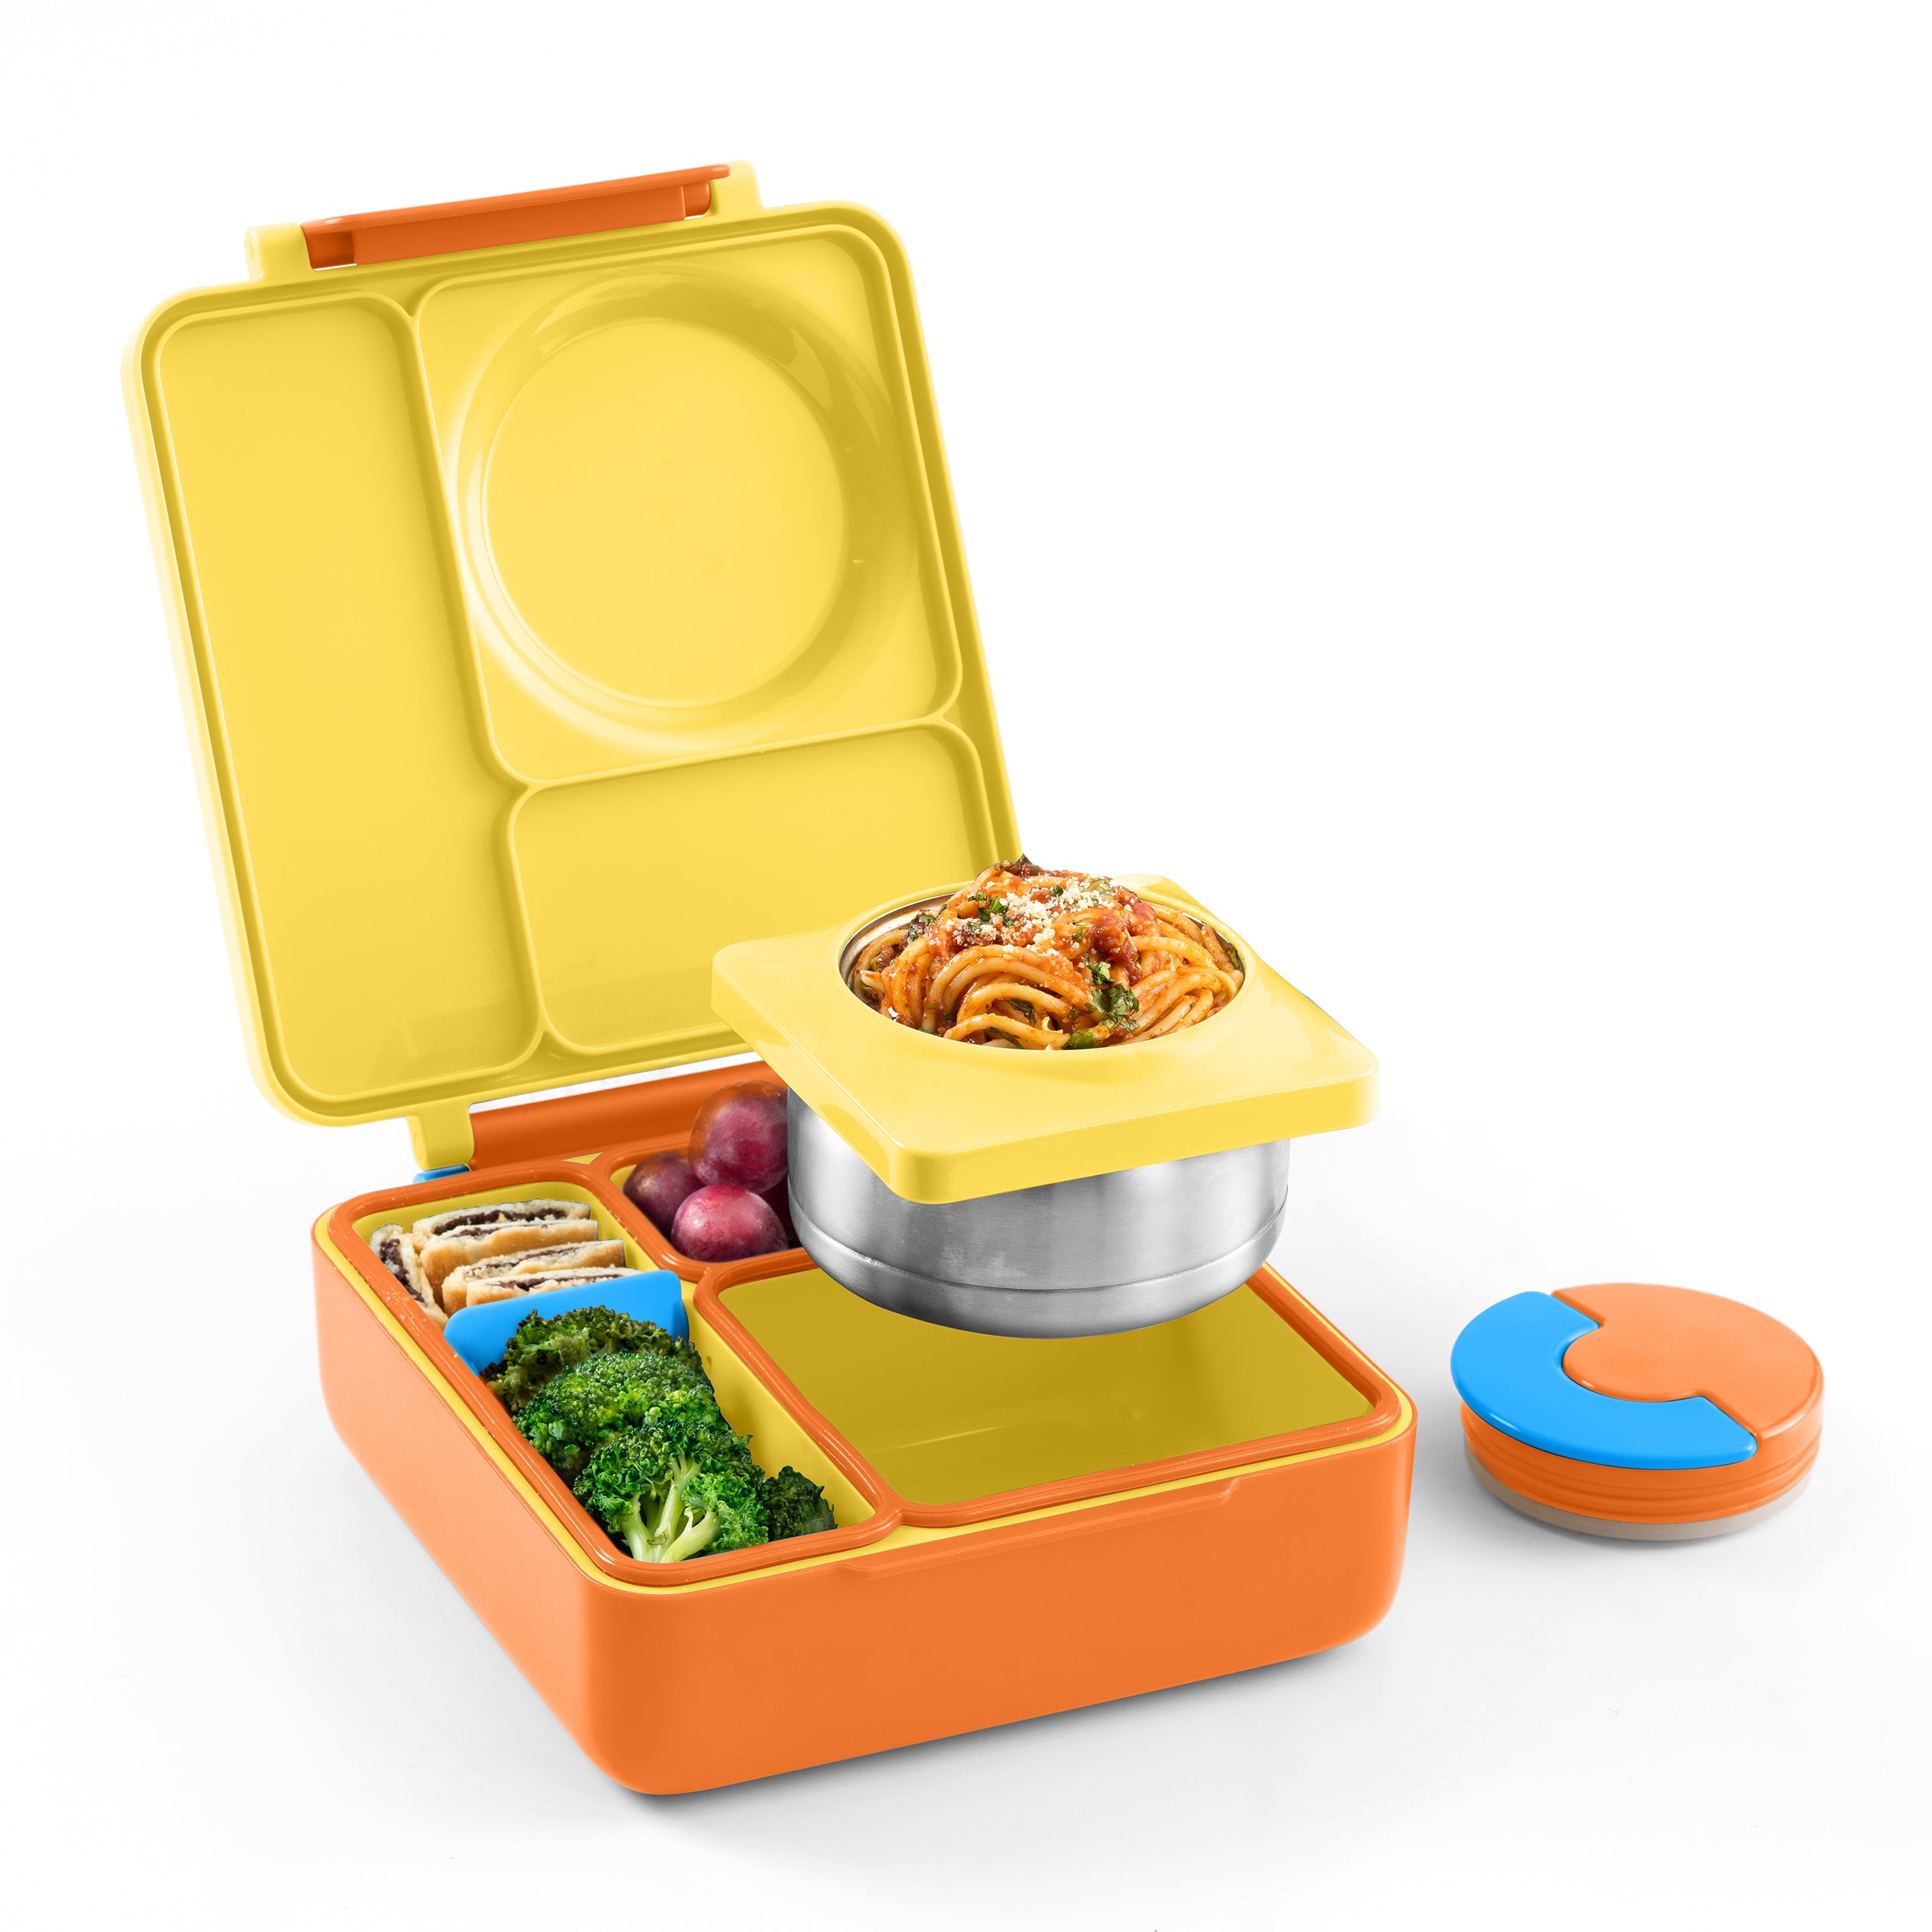 Lunch Boxes & Accessories - Order Online & Save